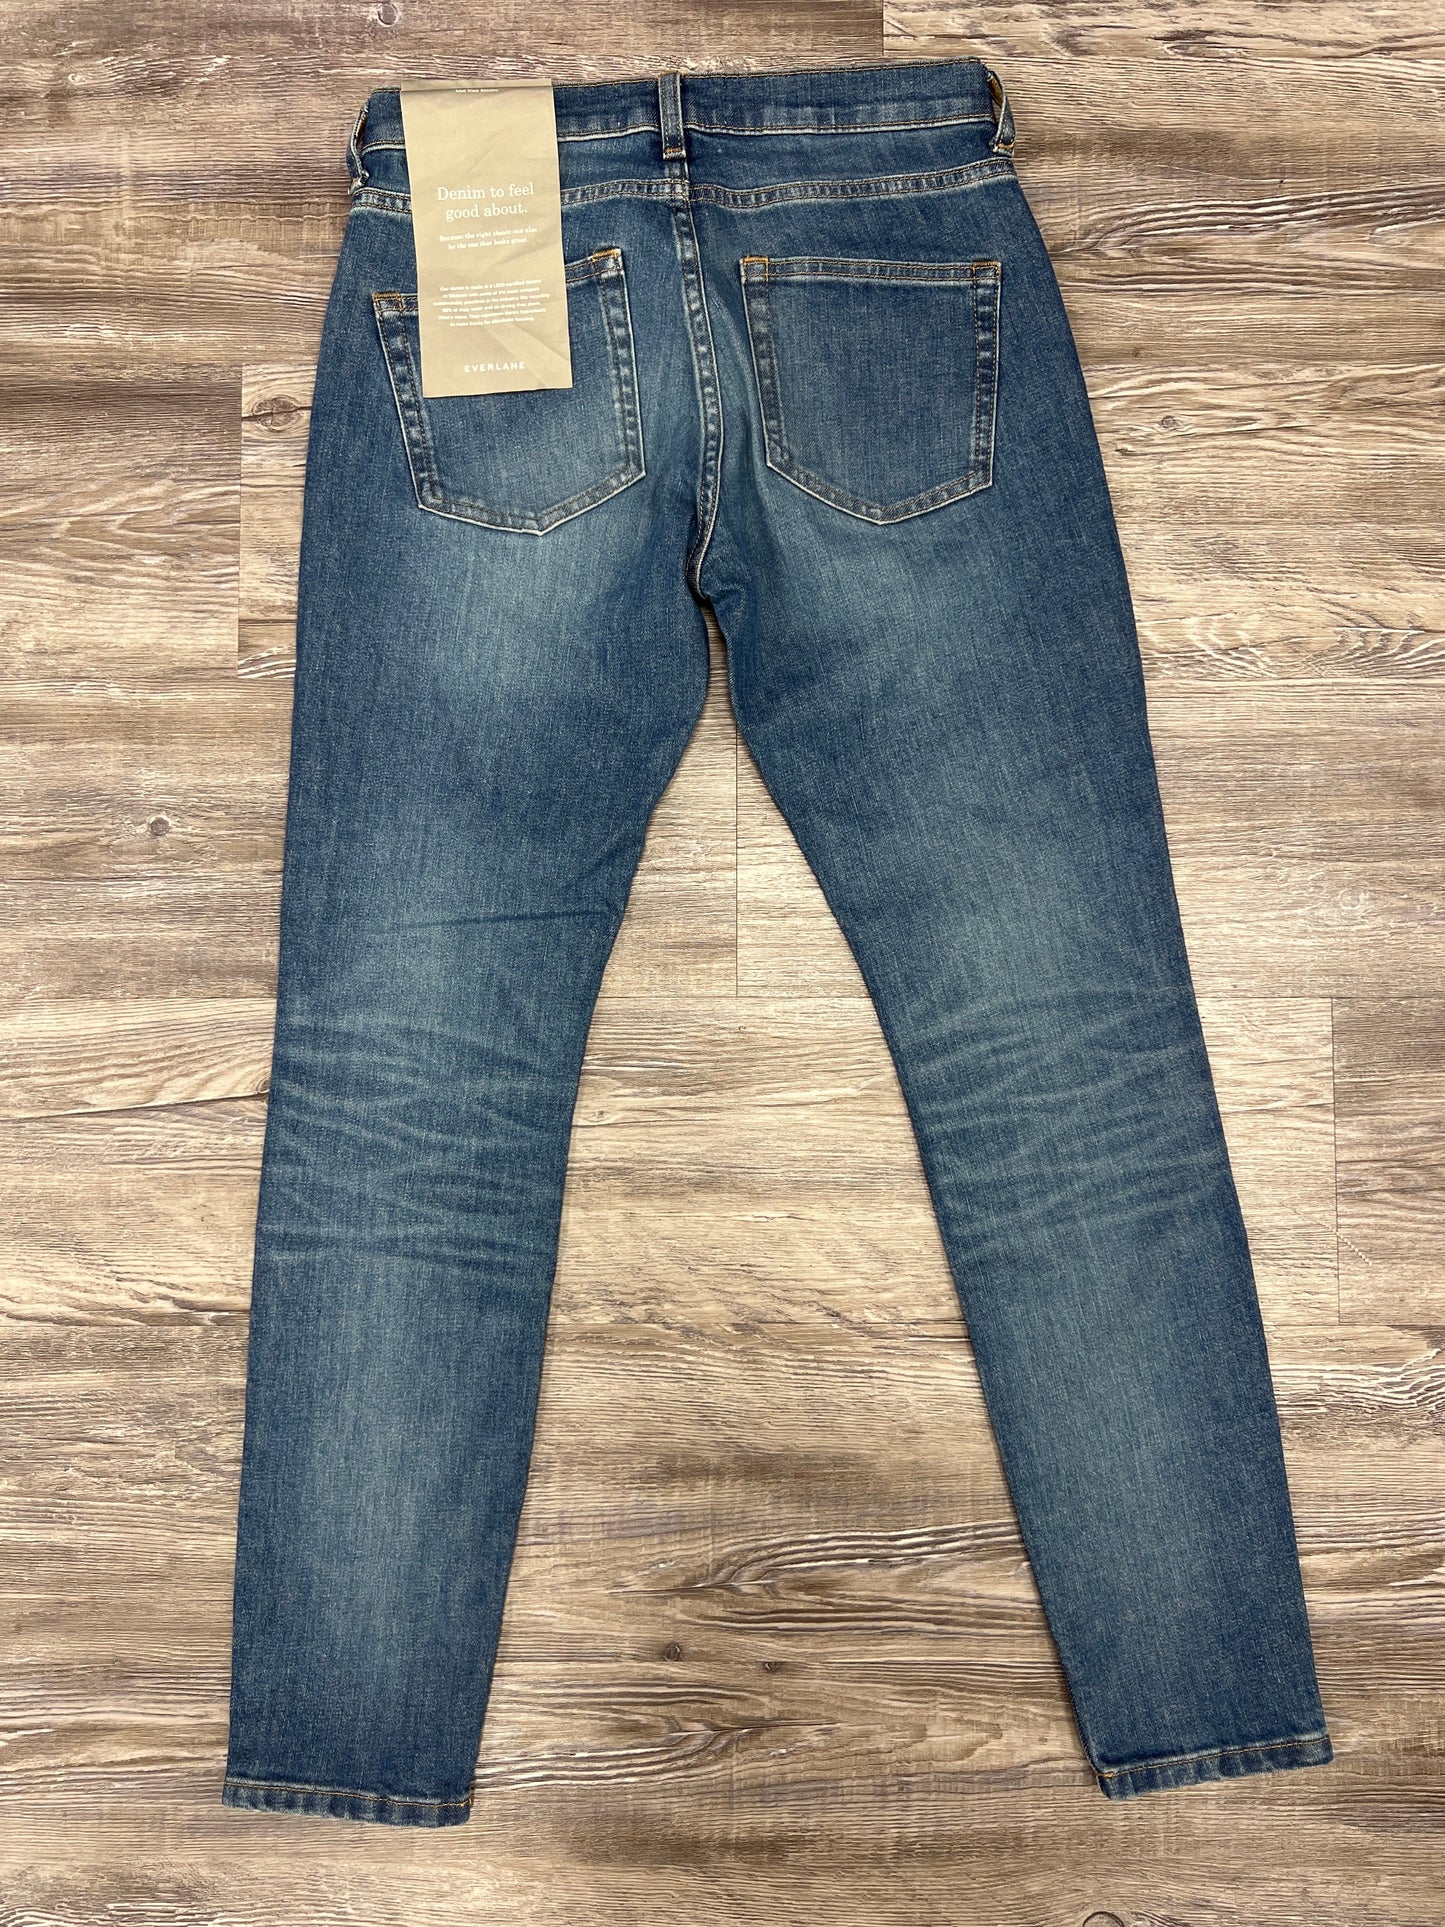 Jeans Skinny By Everlane Size: 2